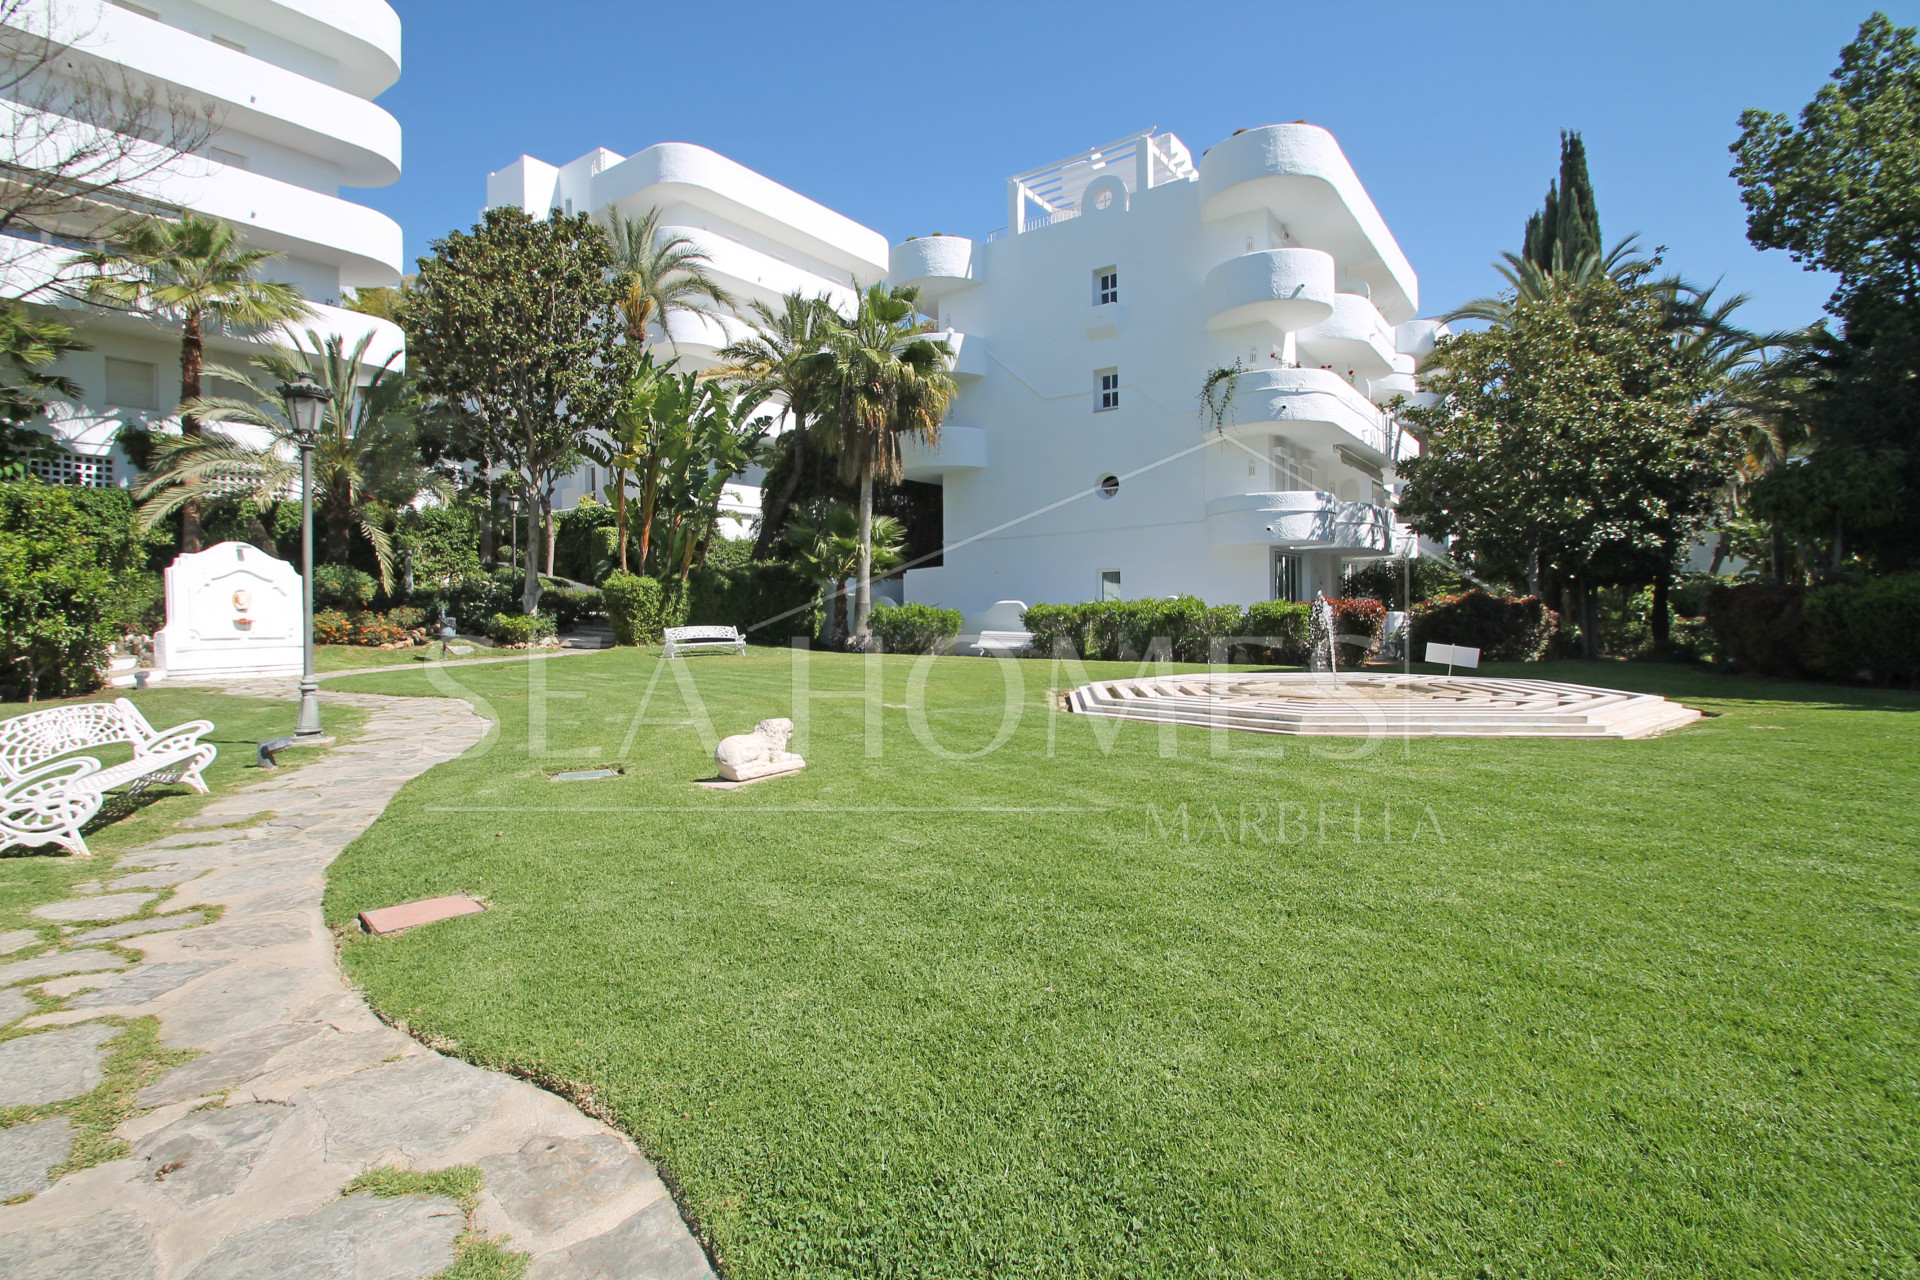 Lovely three bedroom, ground floor apartment in the well-known and gated community Marbella Real.